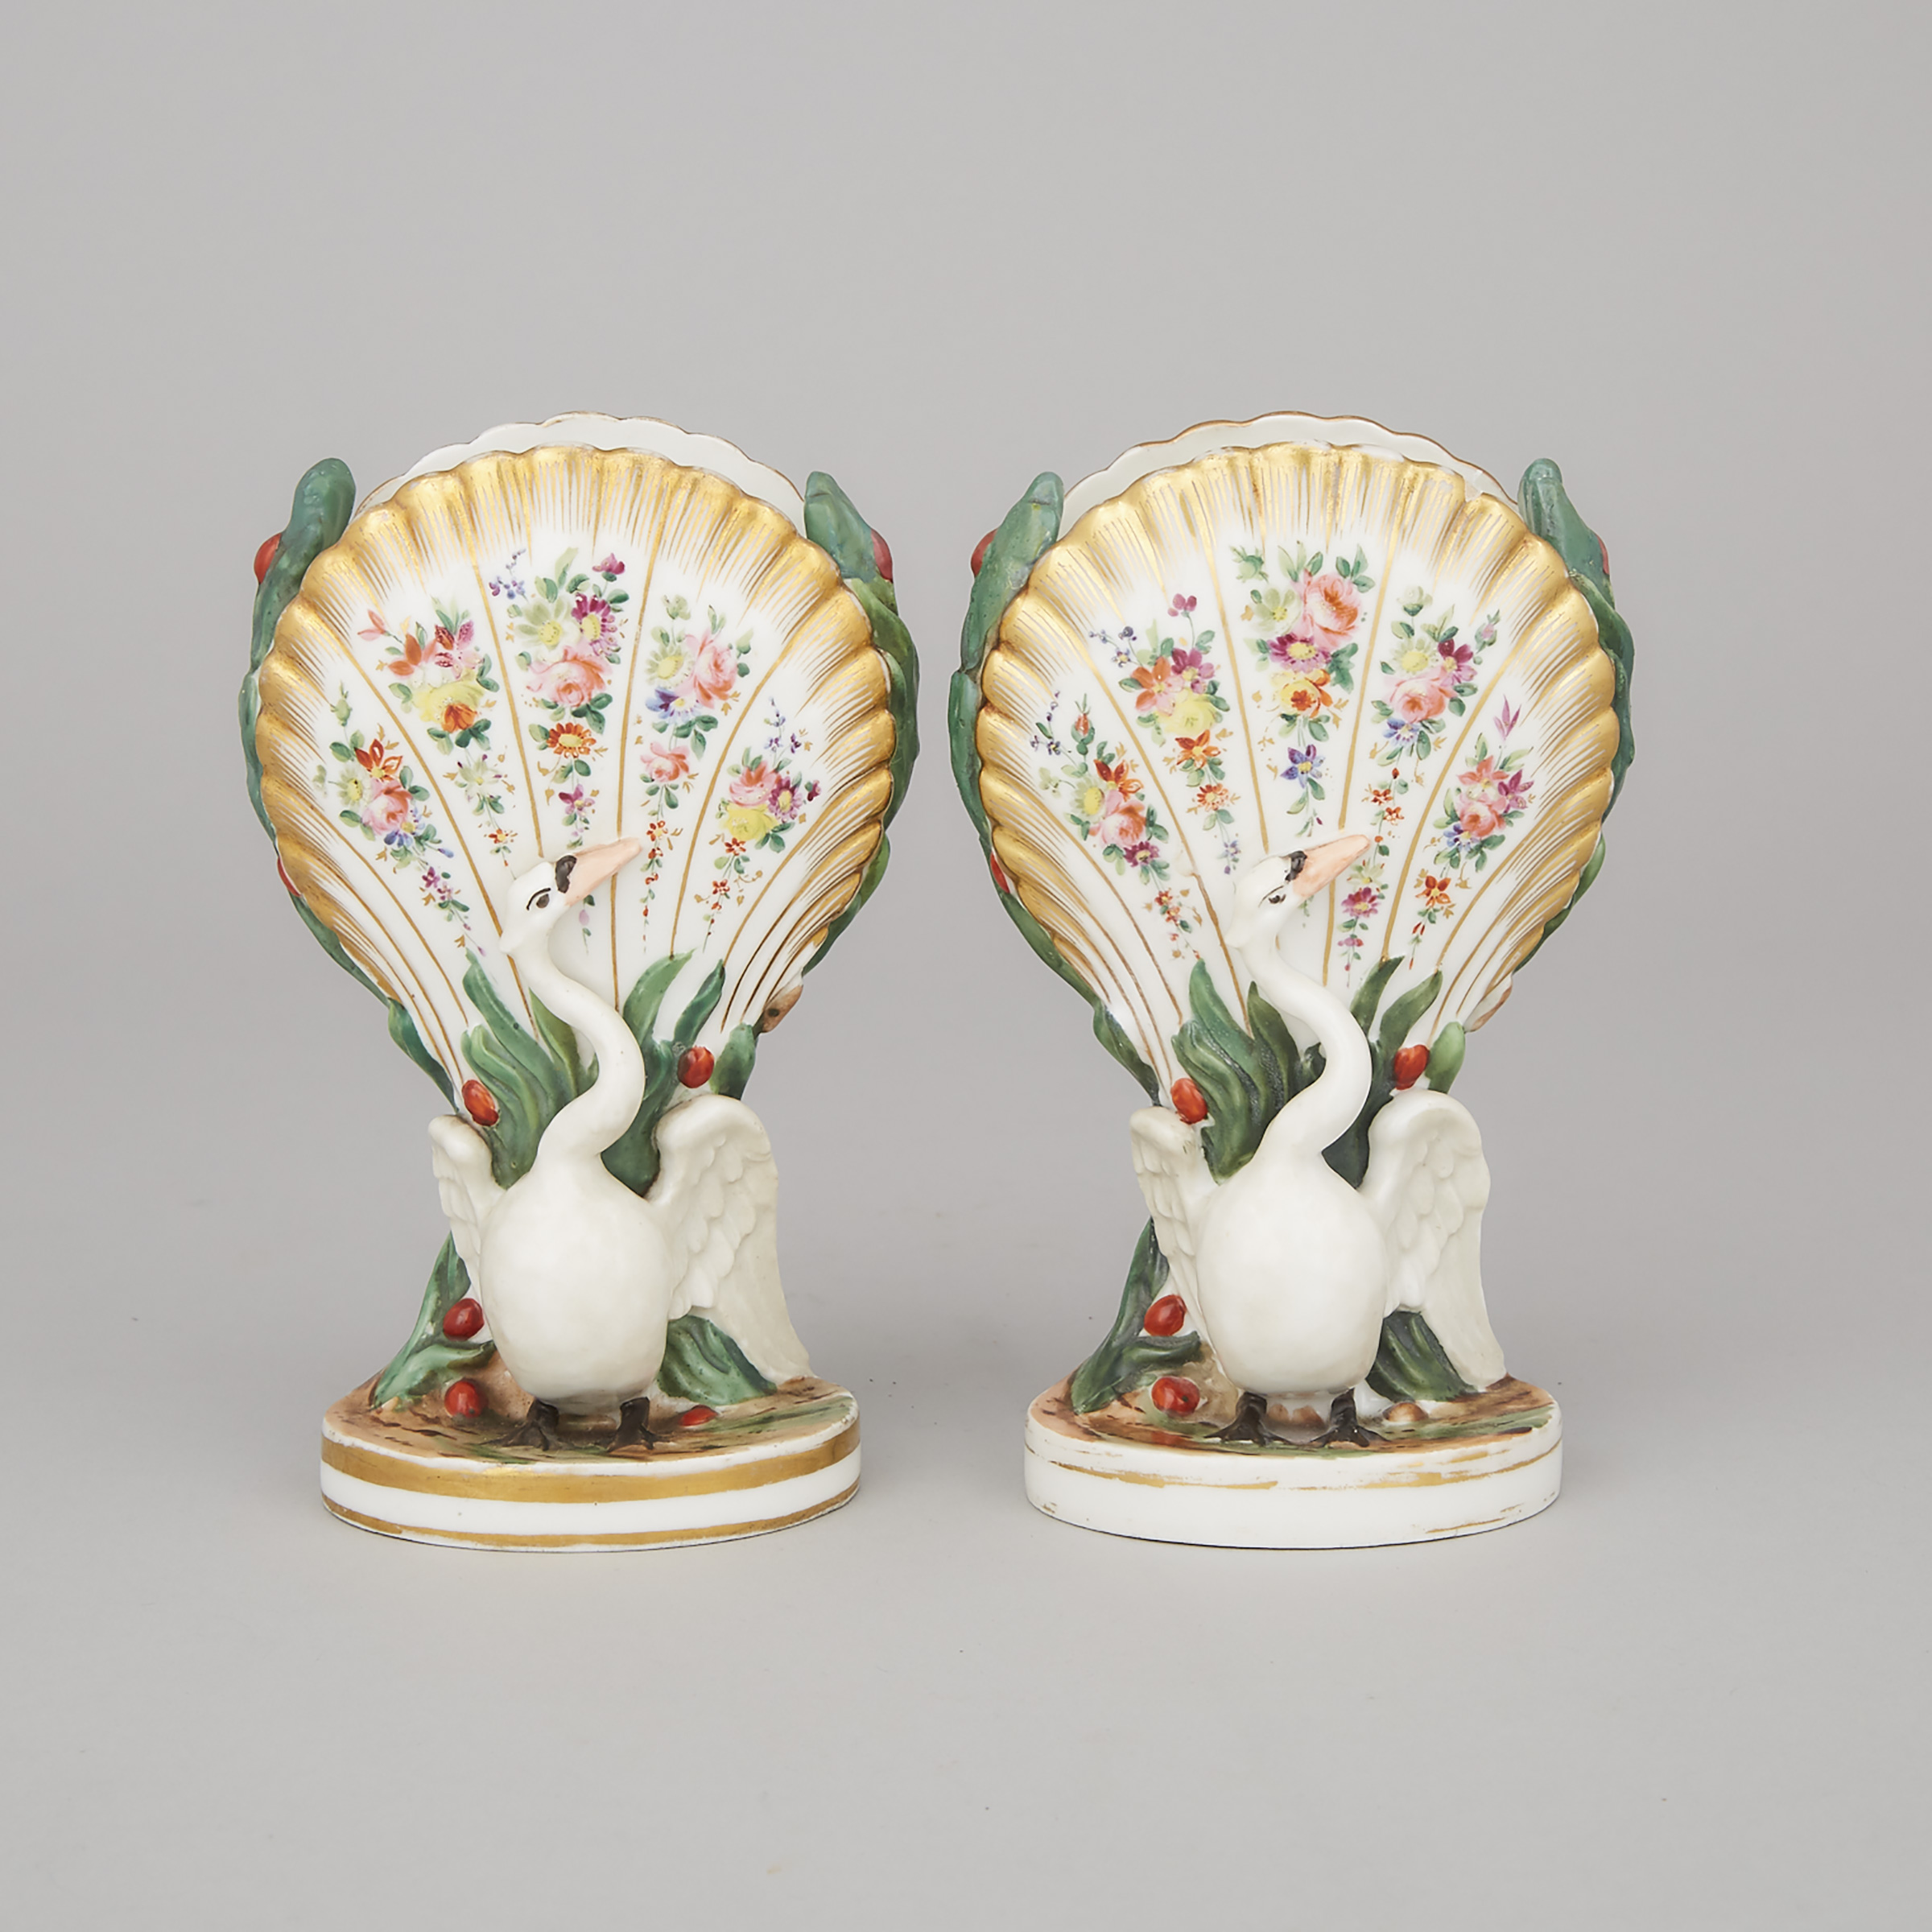 Pair of Jacob Petit Swan and Shell Spill Vases, mid-19th century